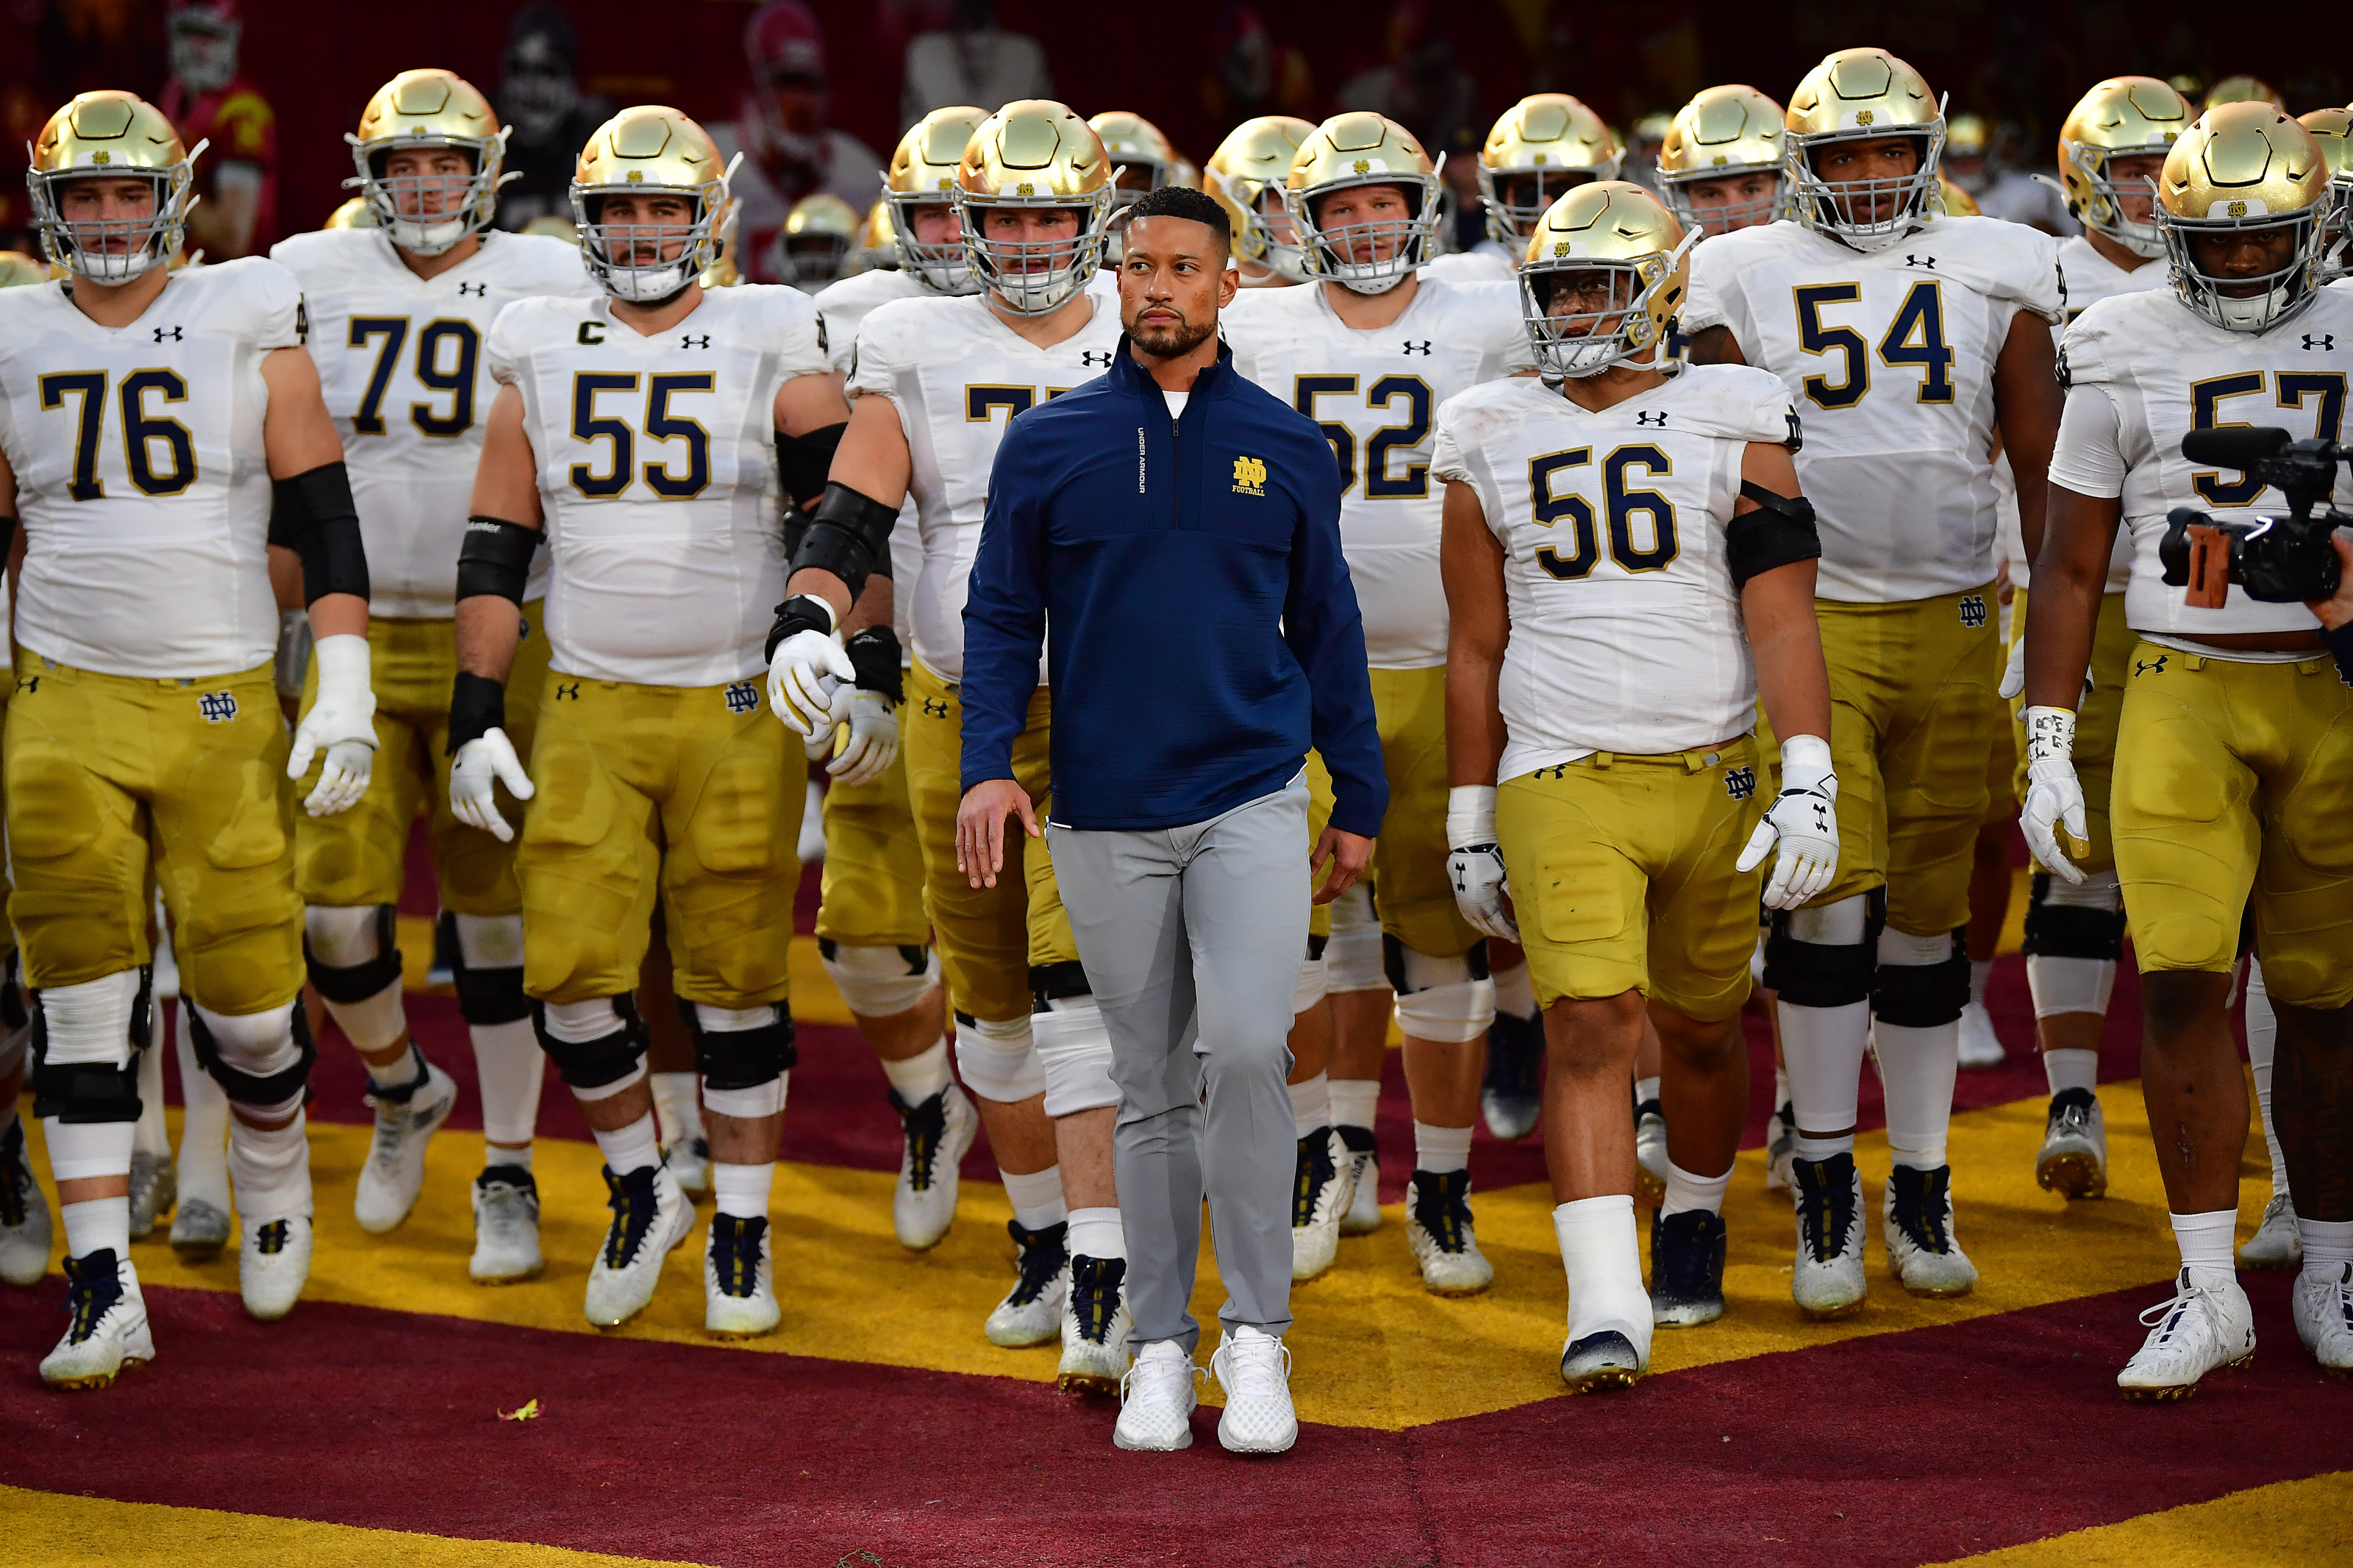 Critiquing the opponent uniforms on Notre Dame's 2023 Football